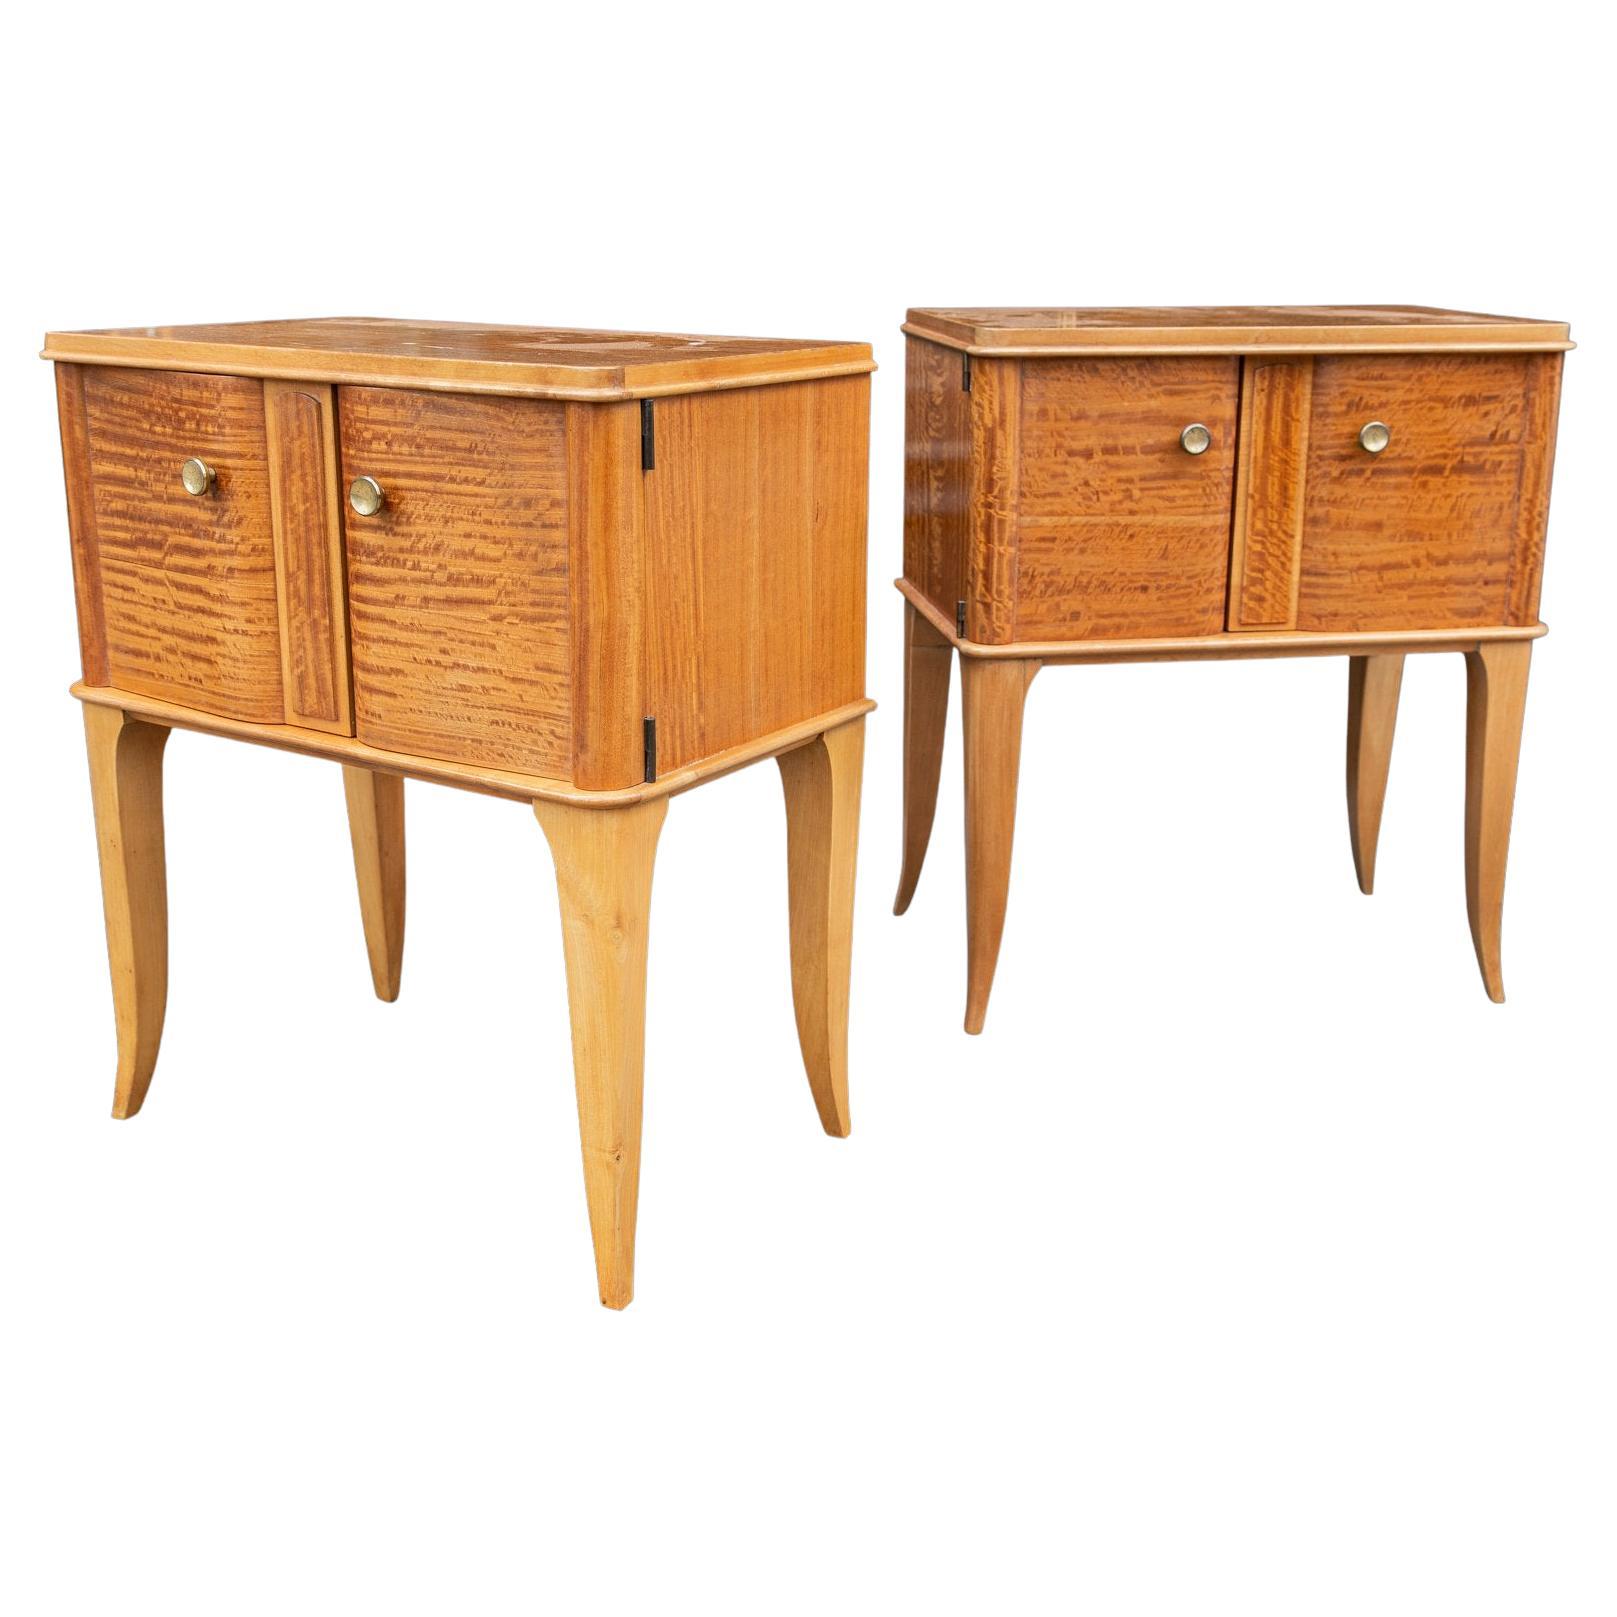 Pair of Bedside Satin Birch Bedside Cabinets Manner of Jean Pascaud, France 1940